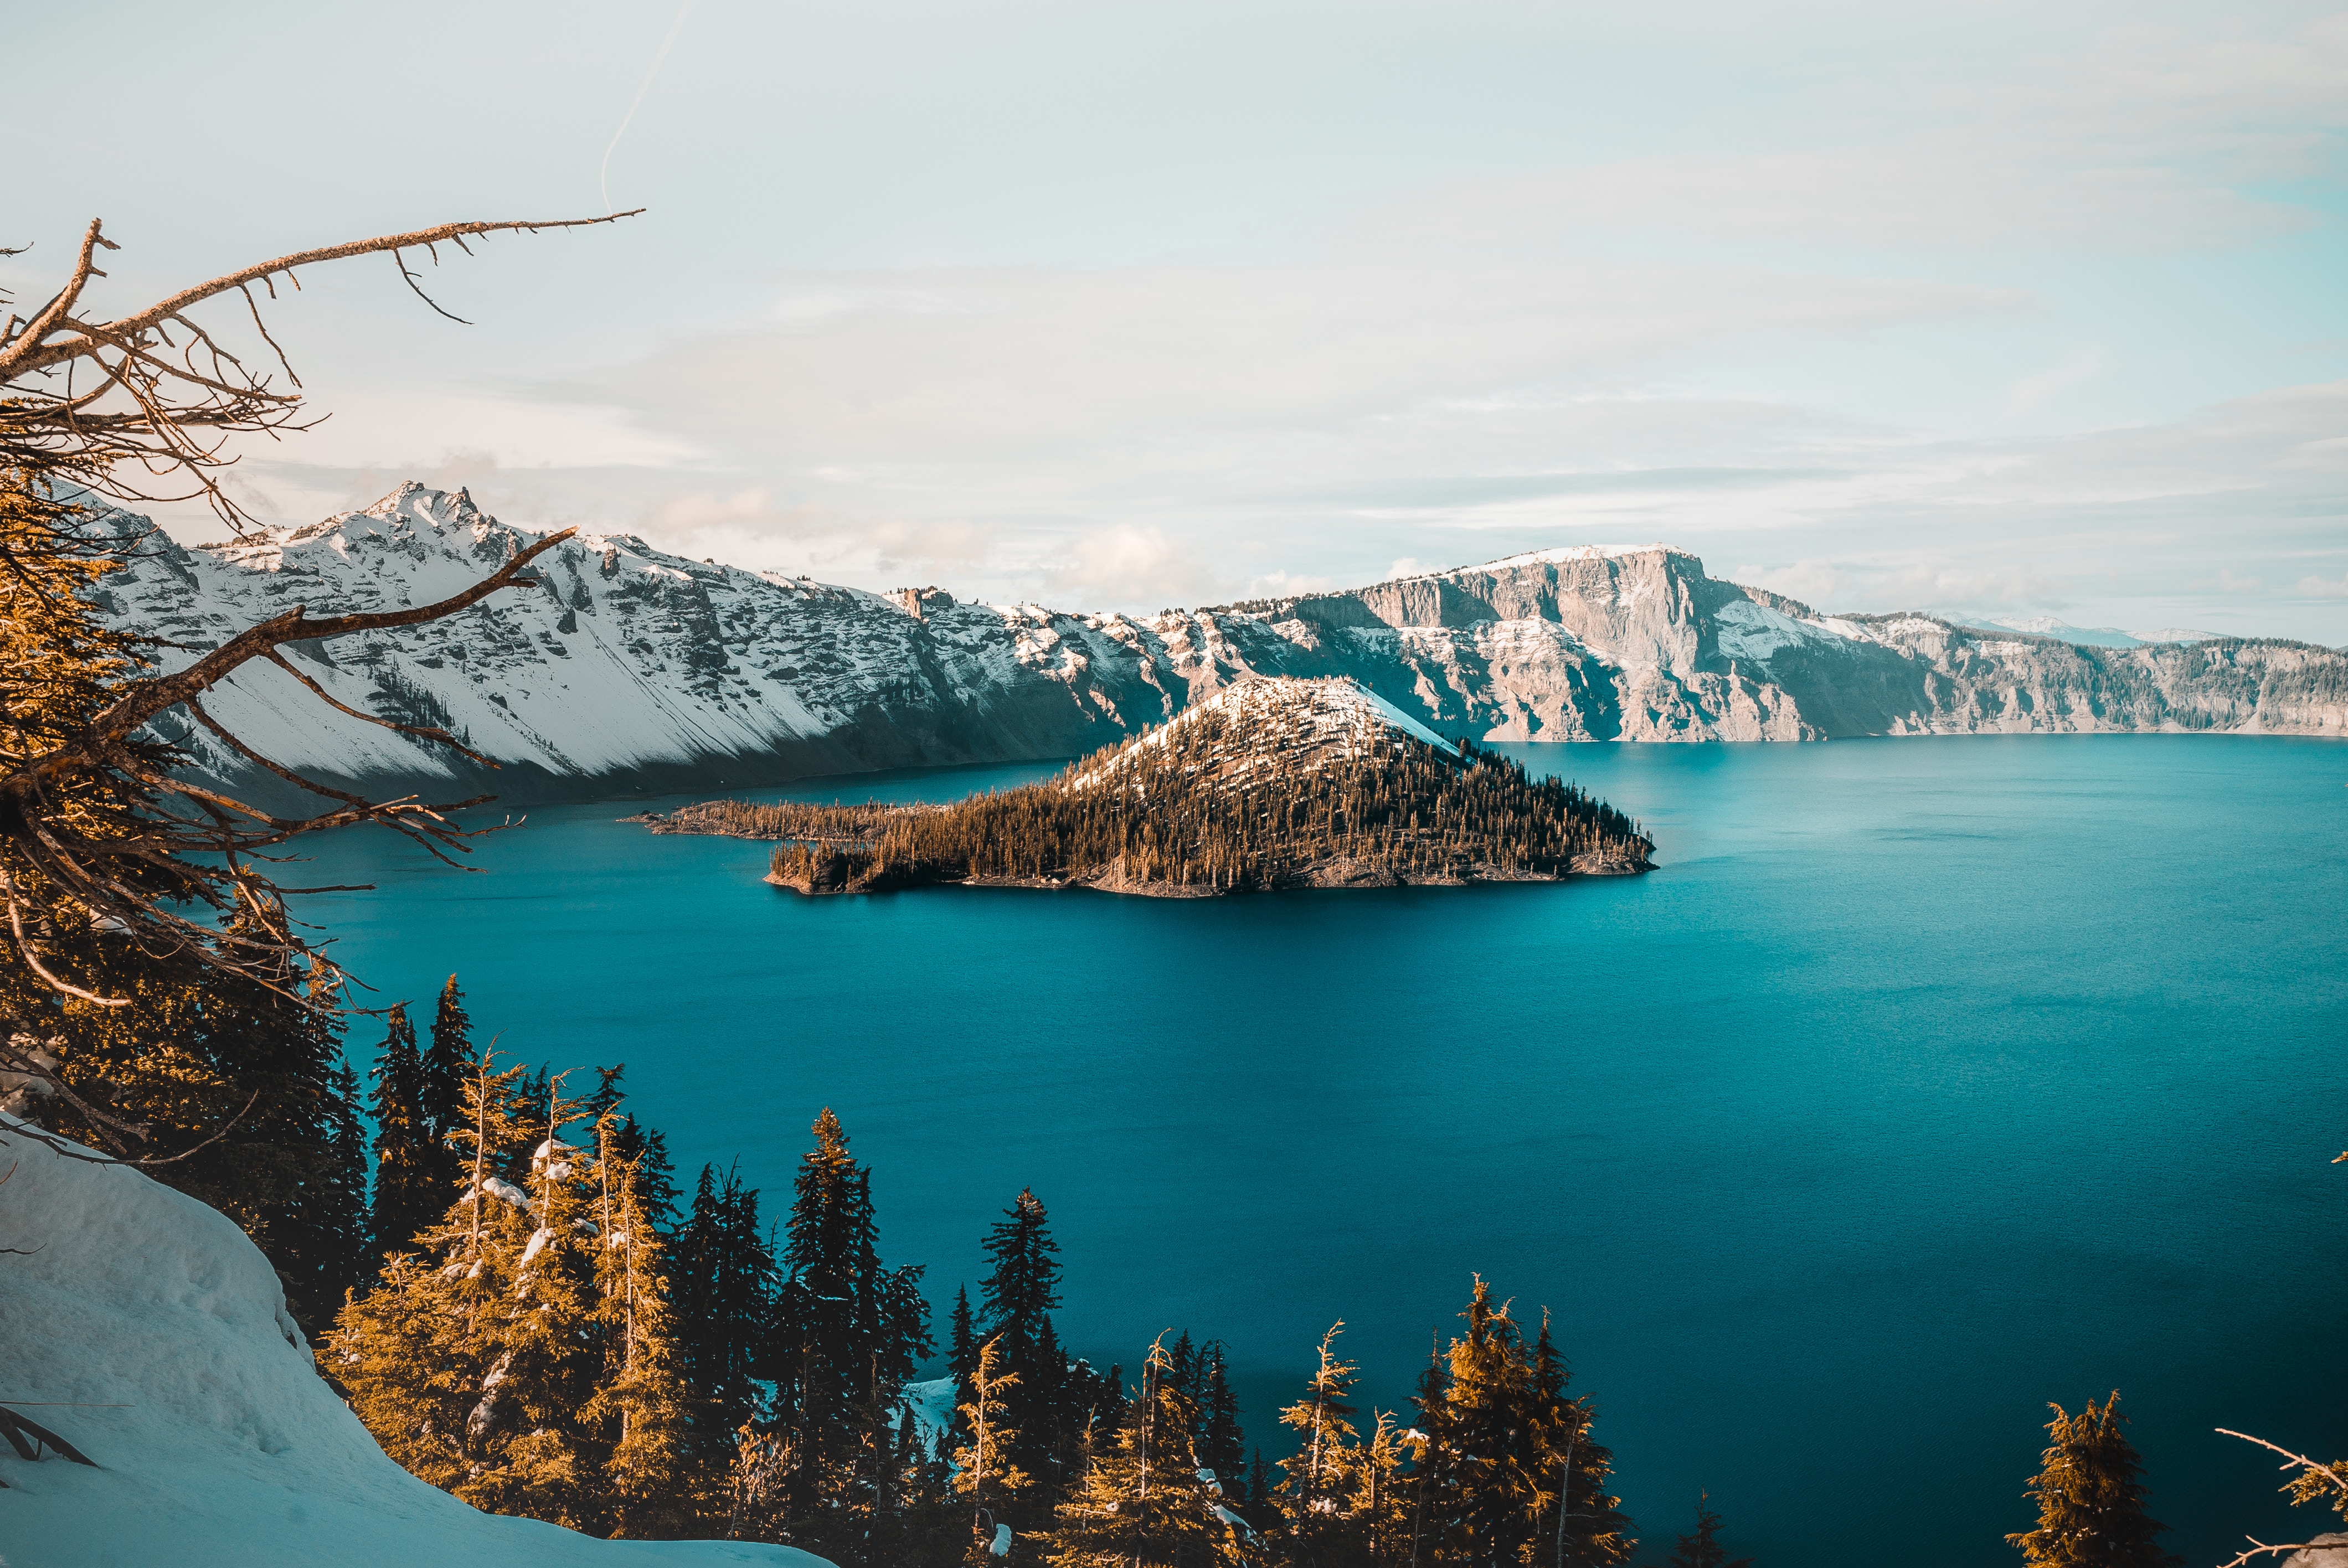 General 4240x2832 landscape nature lake mountains snow trees sky USA island winter Crater Lake (Oregon) water